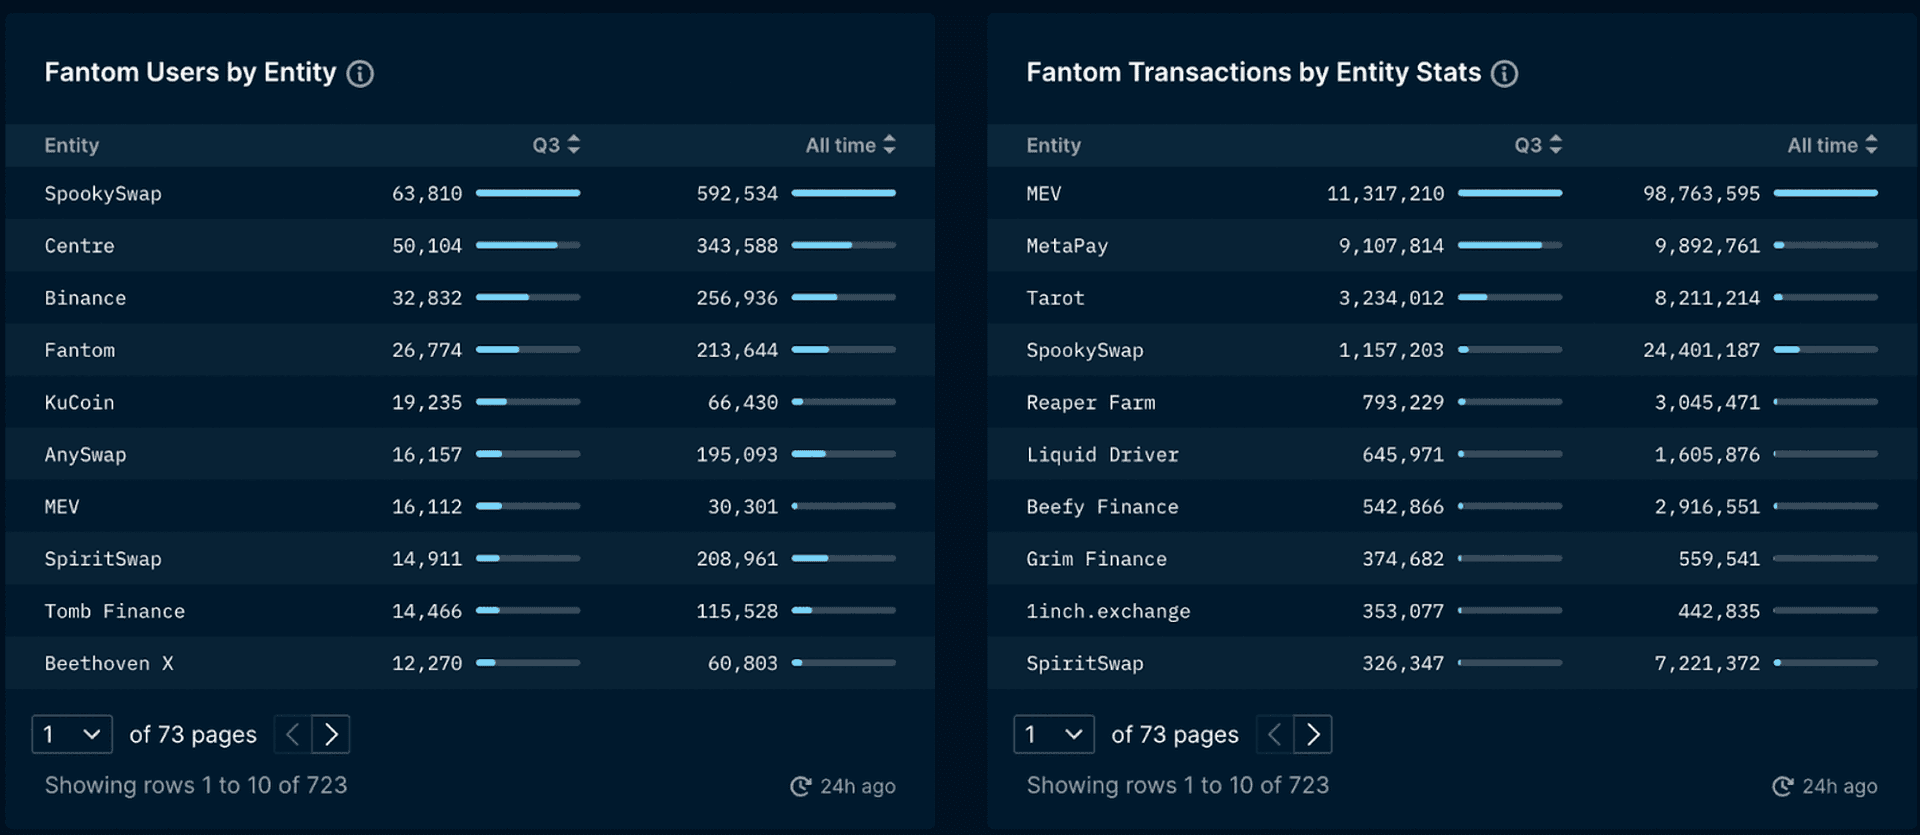 Top Entities on Fantom Based on Users and Transactions (data excludes unlabelled entities)